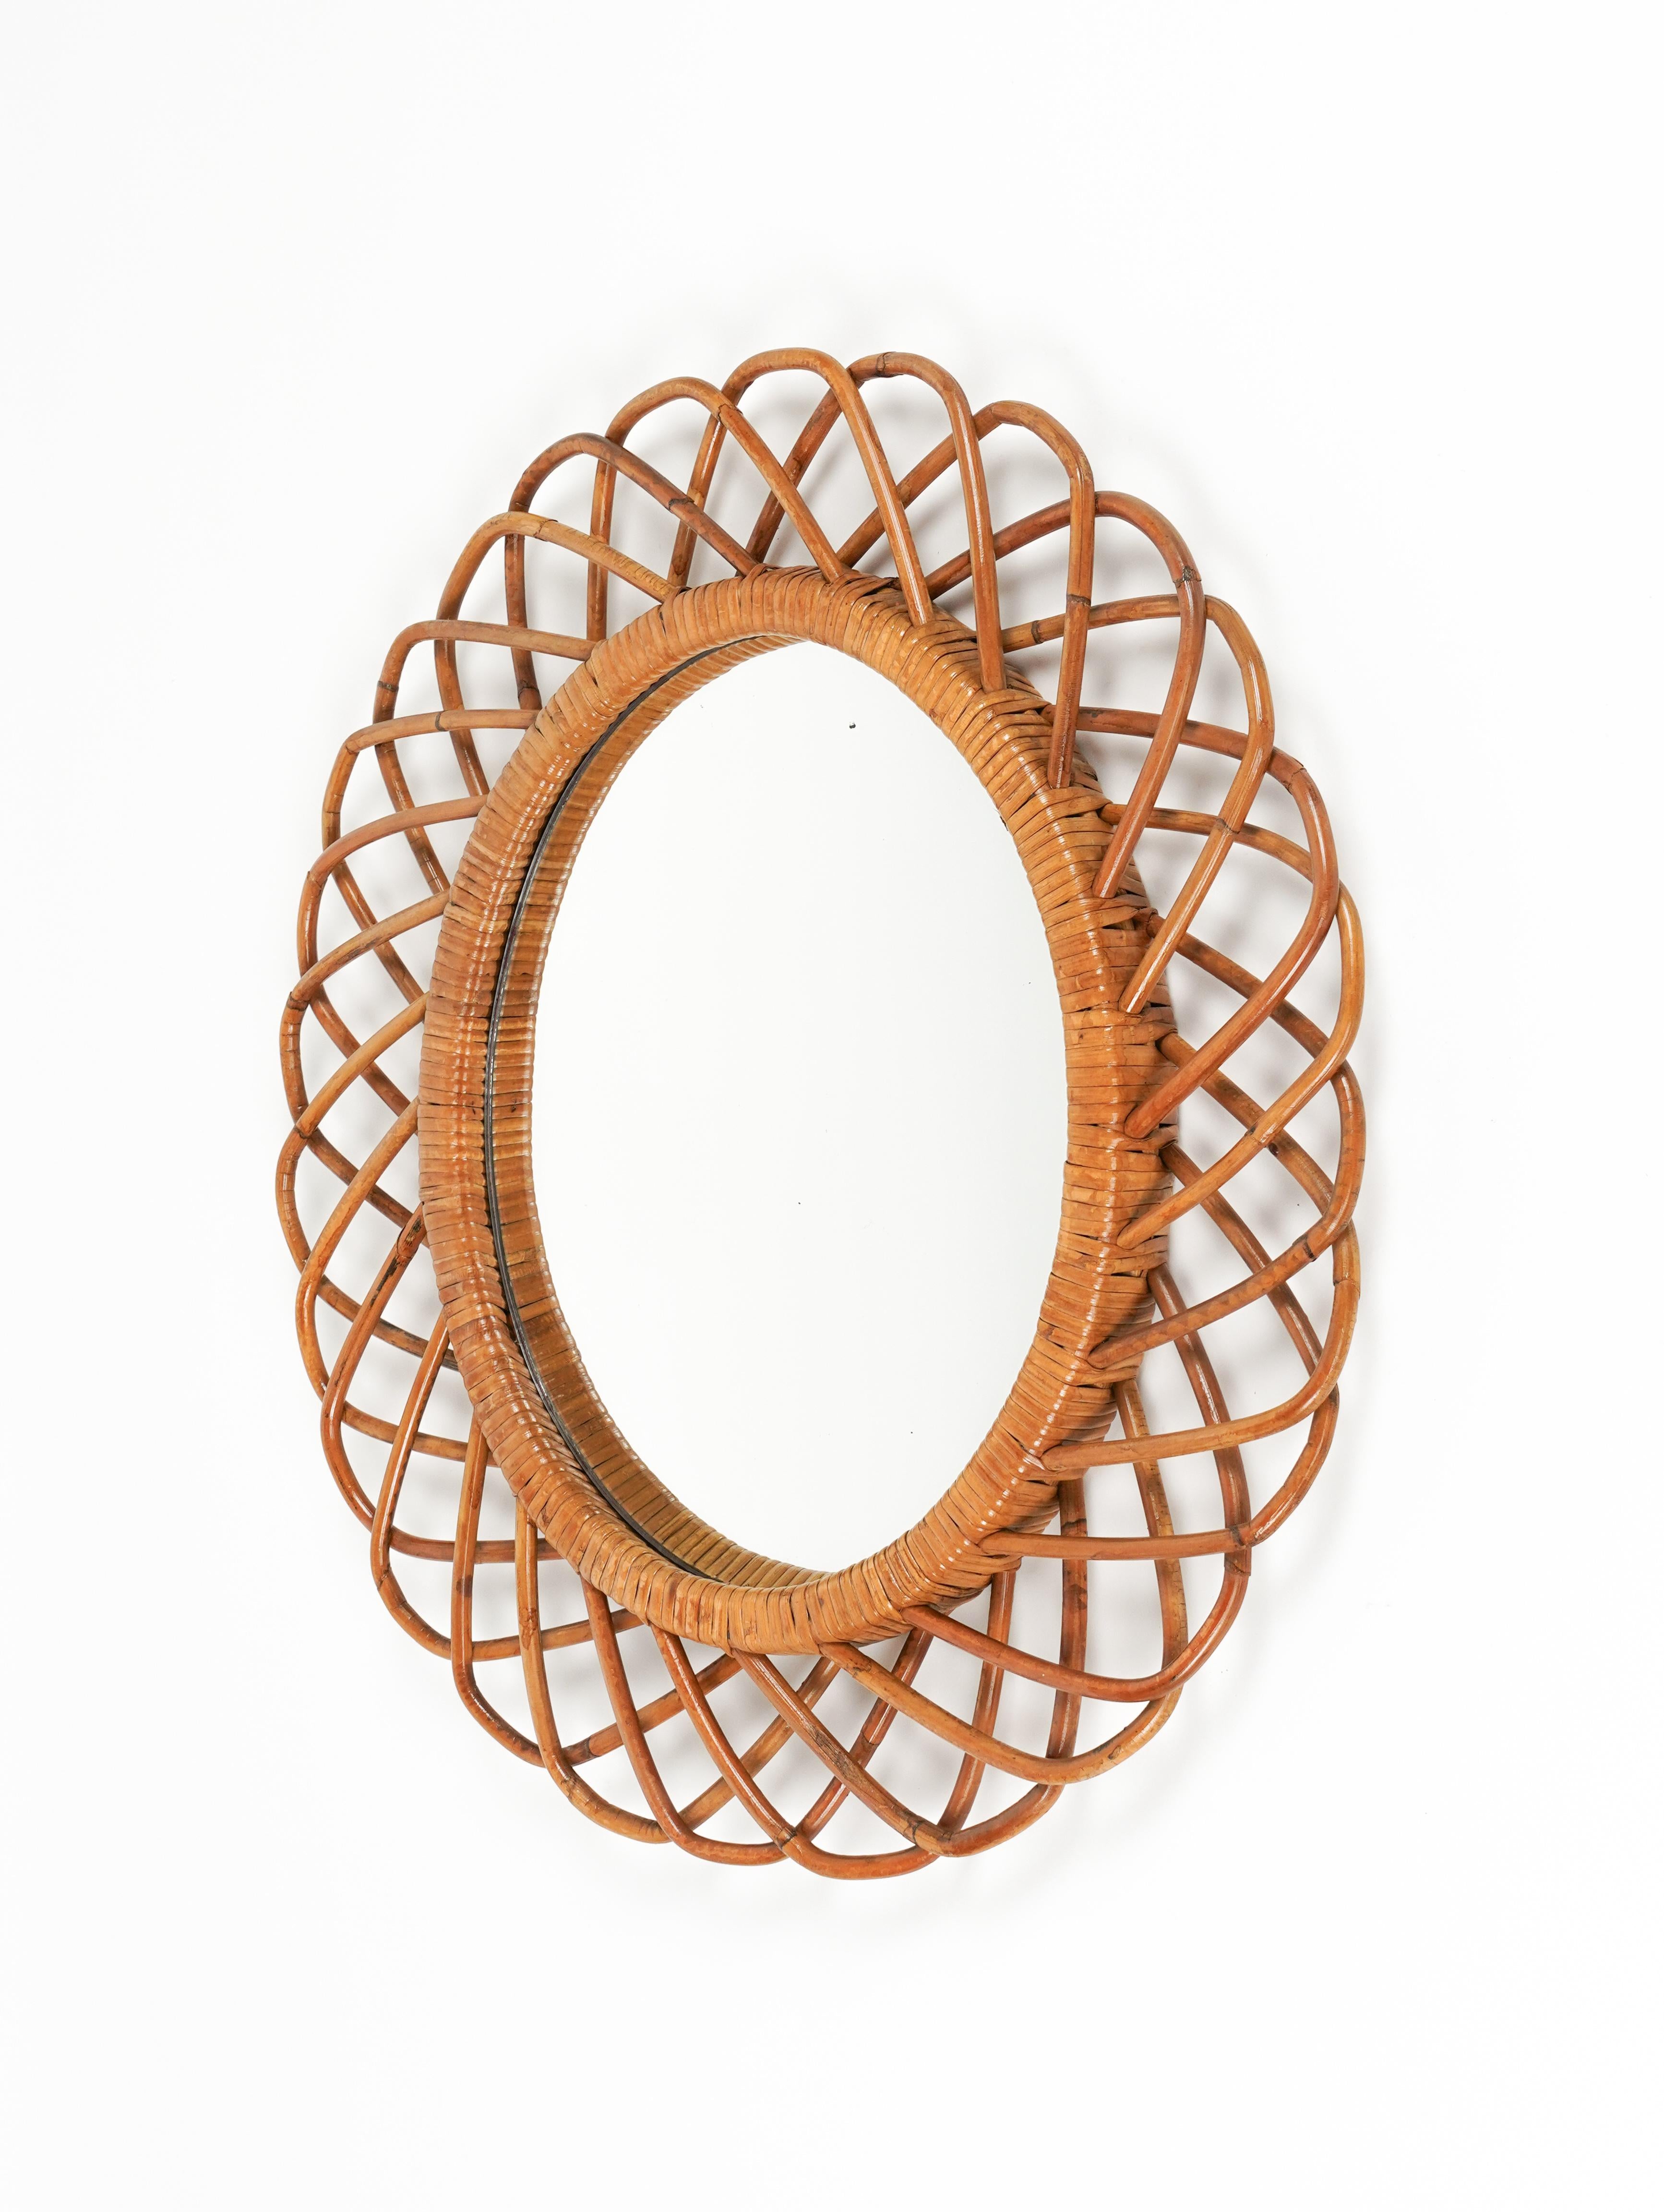 Midcentury Rattan and Bamboo Oval Wall Mirror, Italy 1960s In Good Condition For Sale In Rome, IT